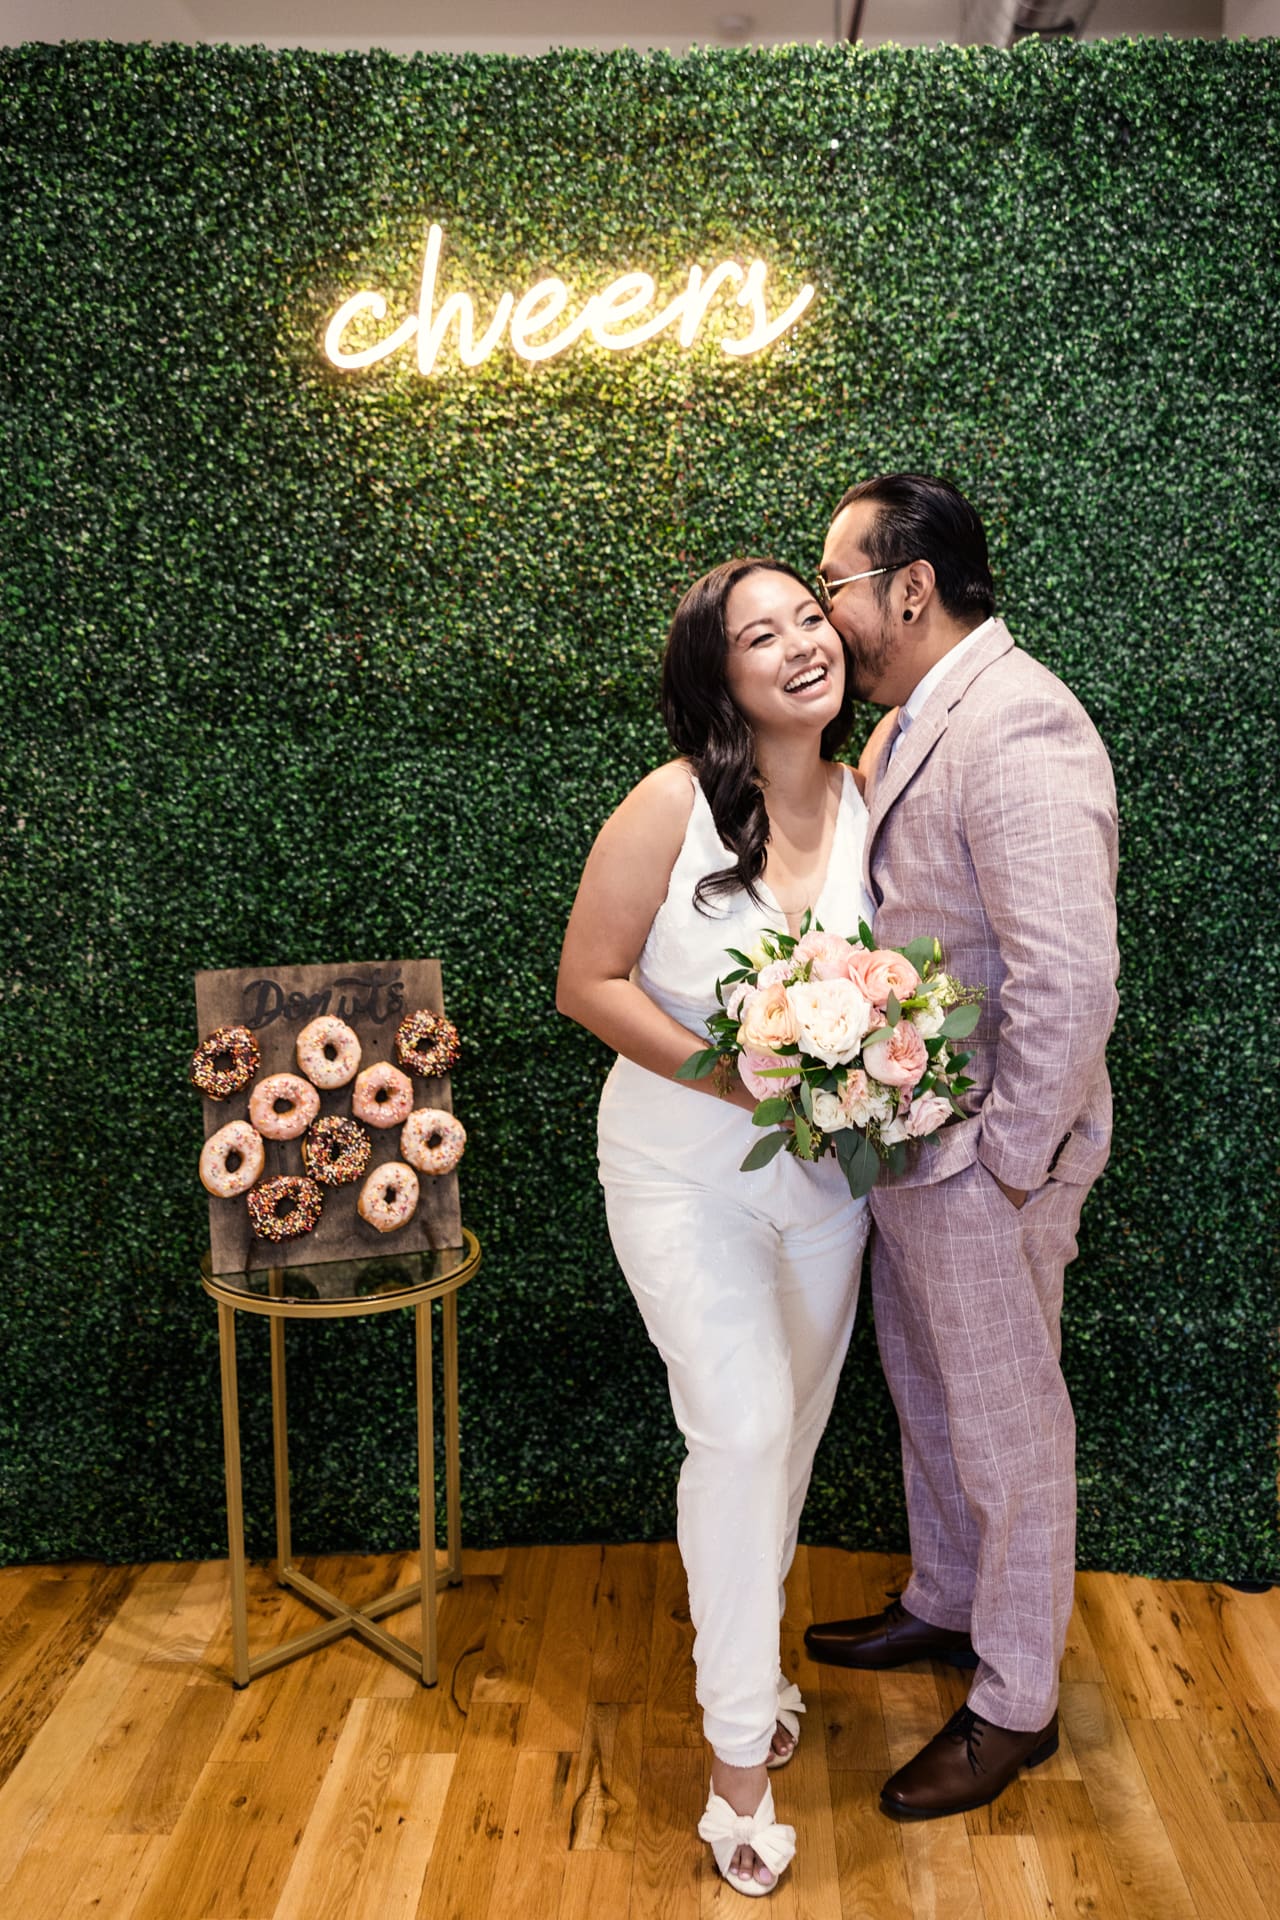 Just married bride and groom in front of greenery wall with Cheers neon sign and donut wall after their intimate wedding ceremony at P&M Studio Chicago event space in West Town